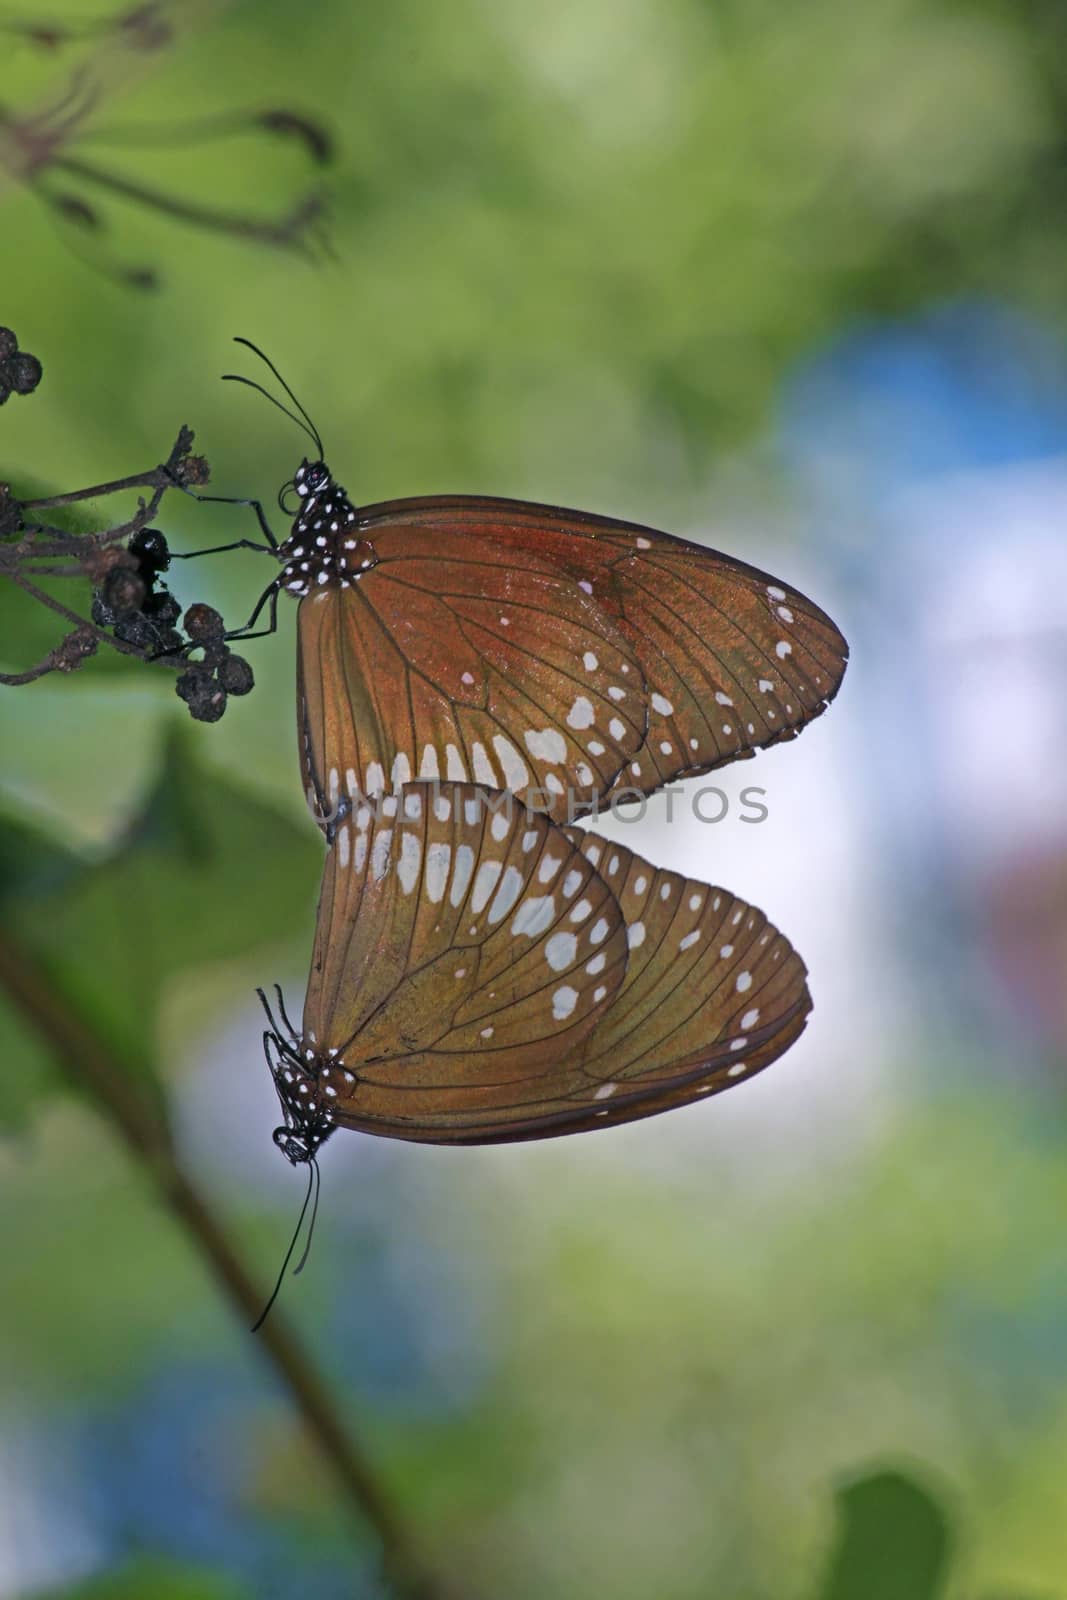 Mating of Common Crow Butterfly by yands